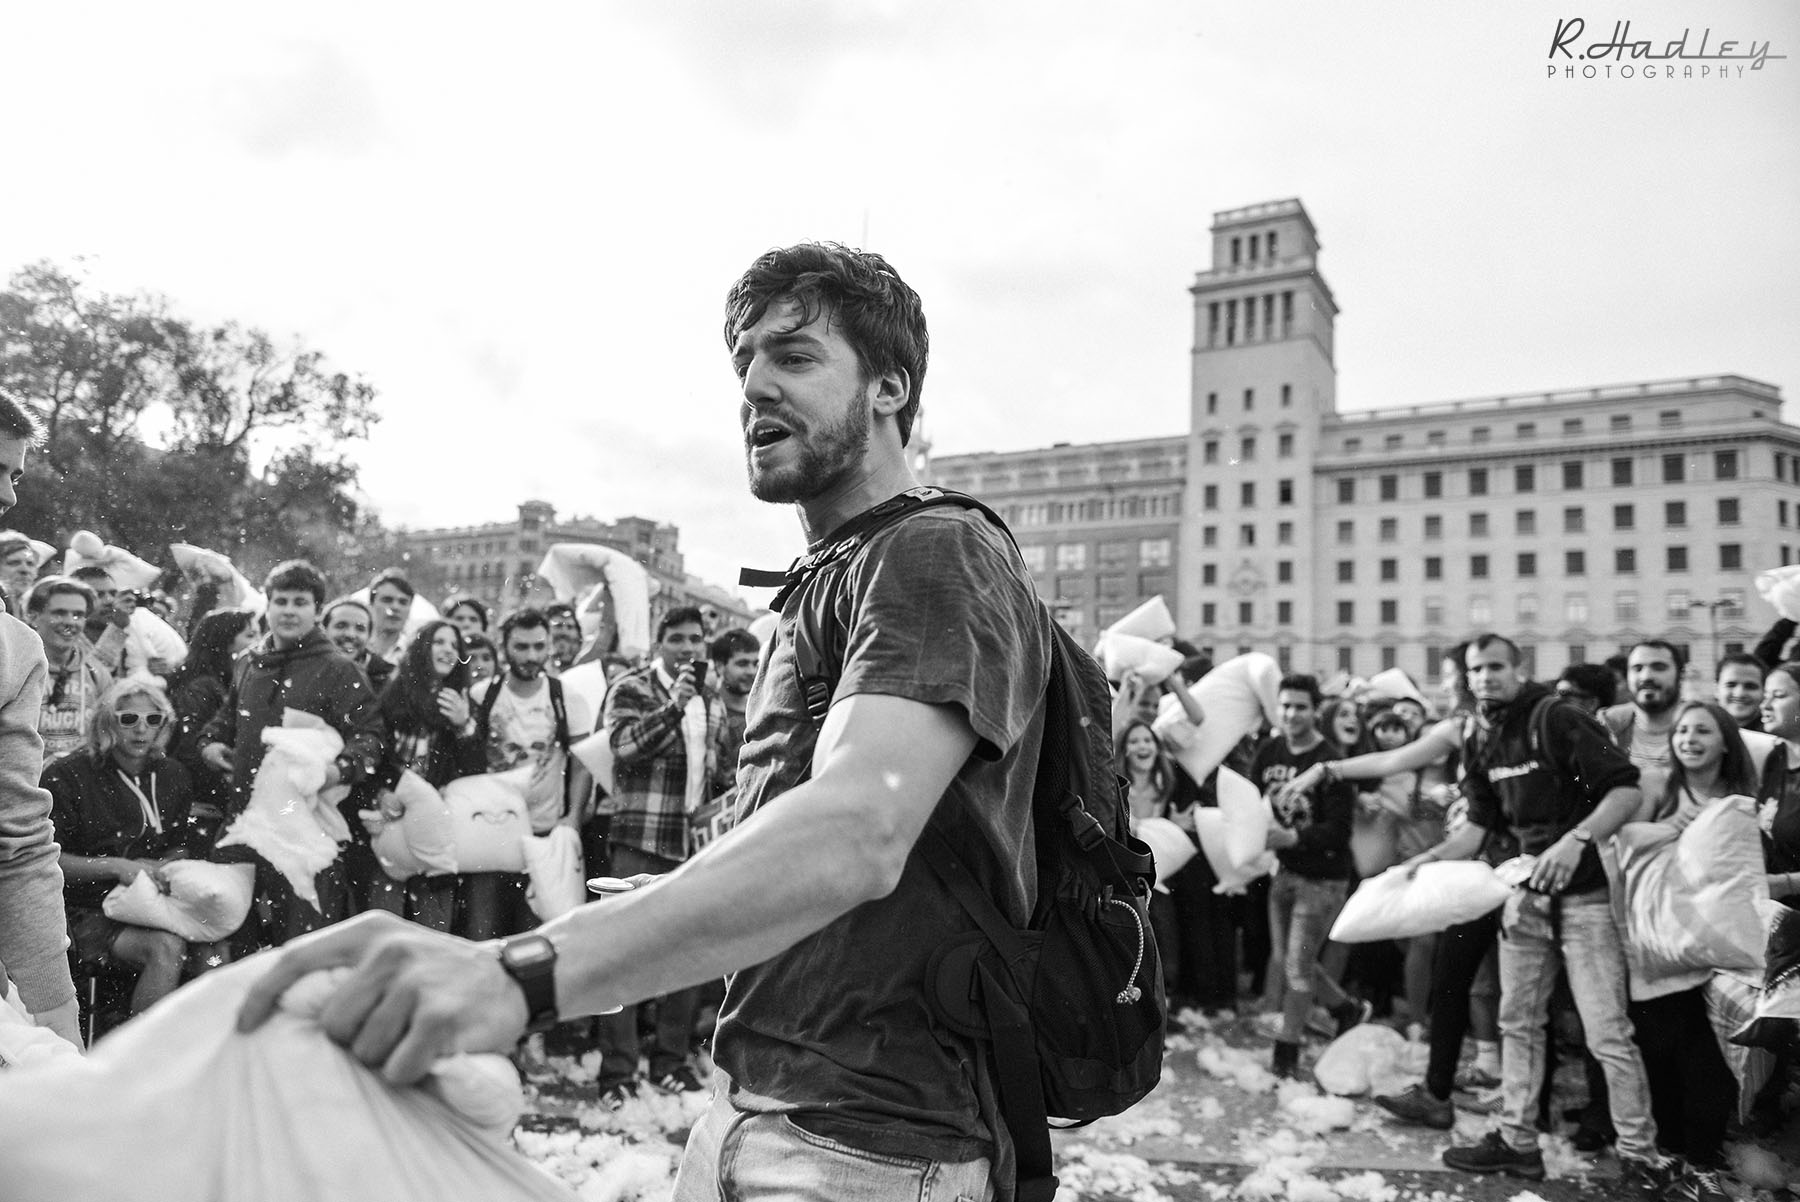 Pillow Fight event in Barcelona